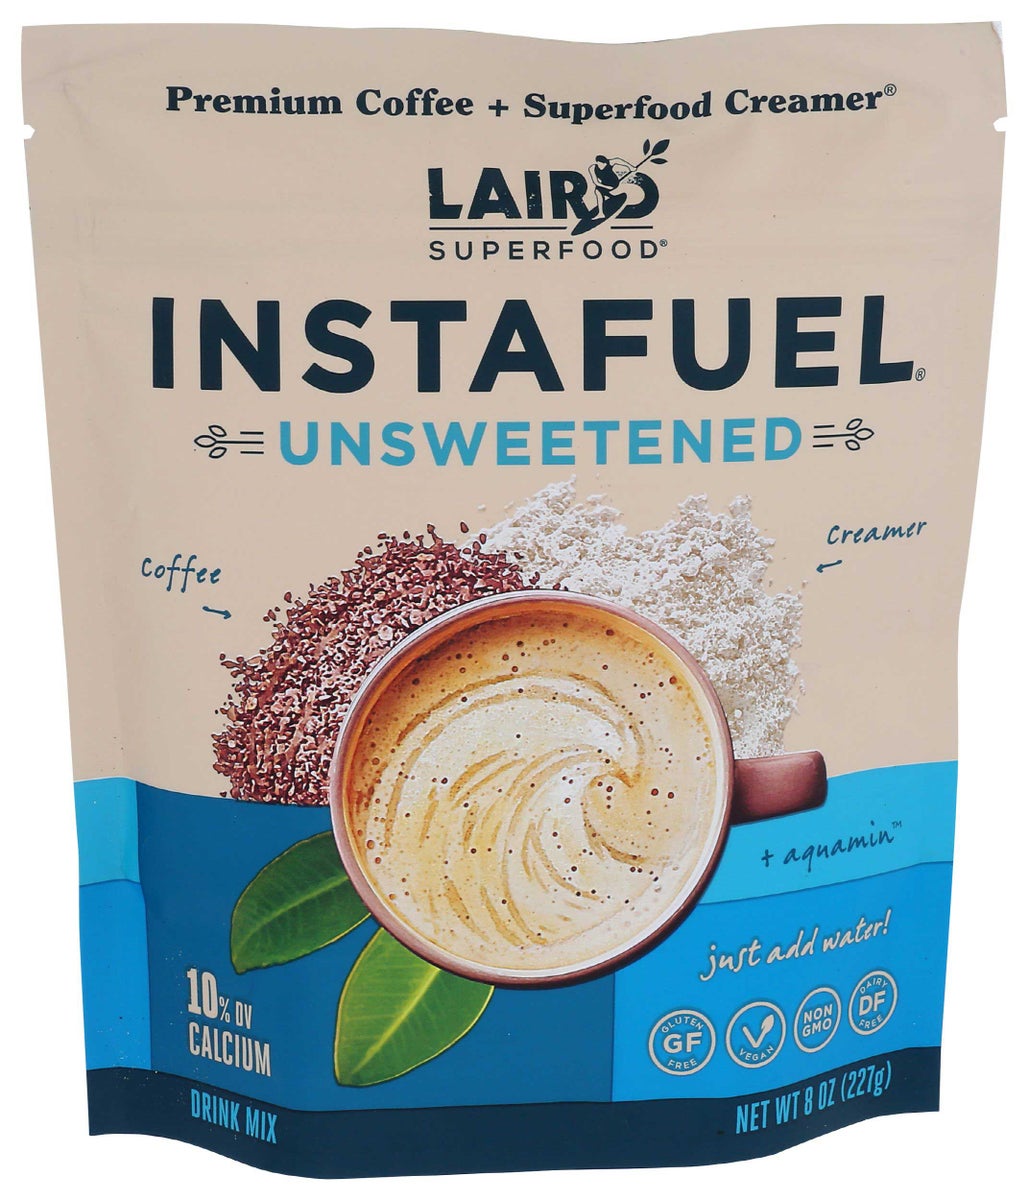 Picture of Laird Superfood KHRM00361751 8 oz Unsweetened Instafuel Superfood Creamer